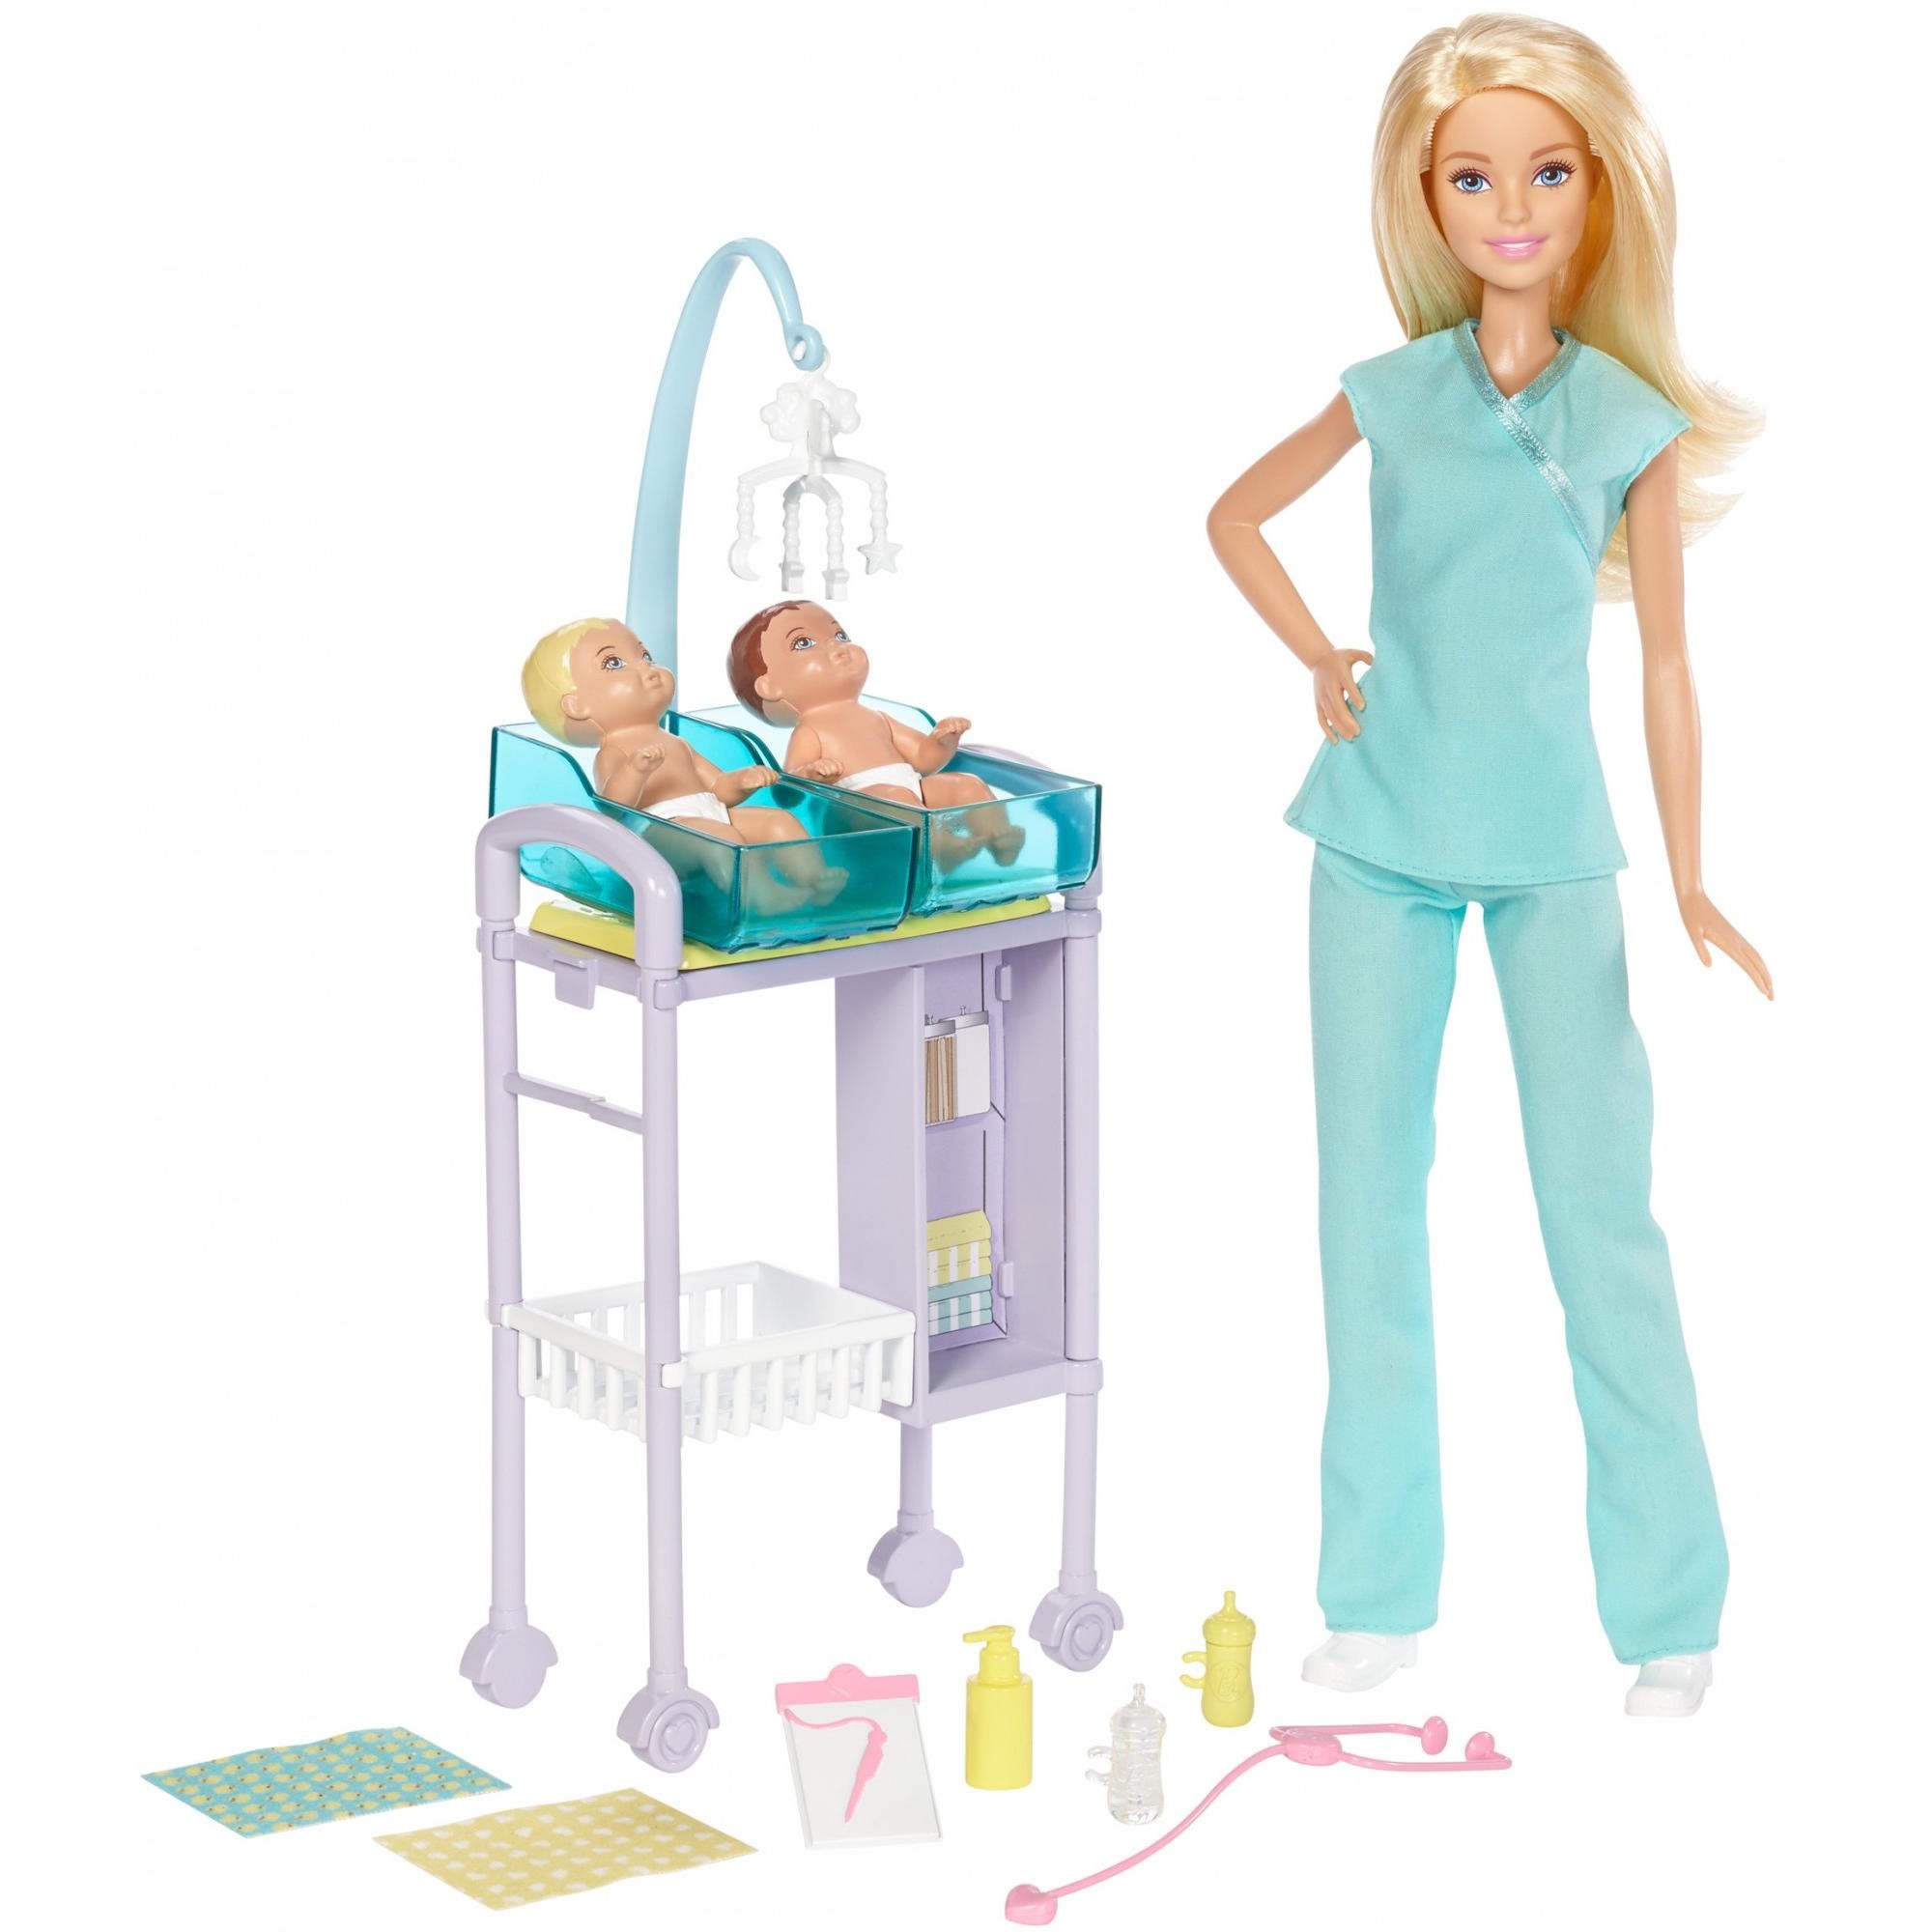 Barbie Careers Baby Doctor Barbie Doll, Blonde, with 2-Patients - image 1 of 5